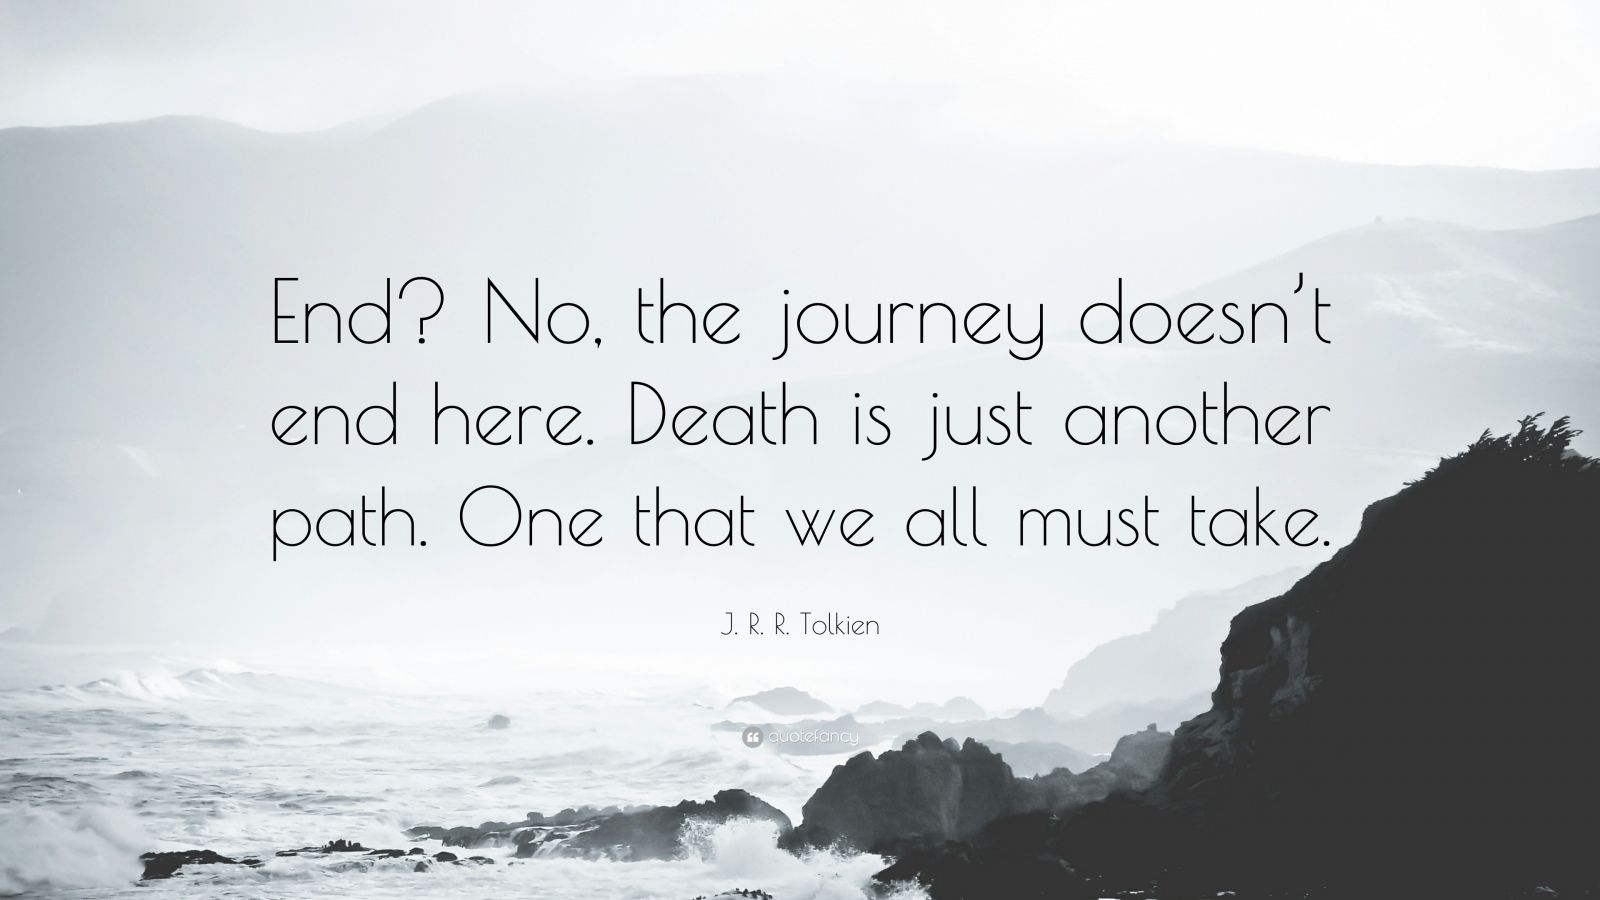 J. R. R. Tolkien Quote: “End? No, the journey doesn’t end here. Death